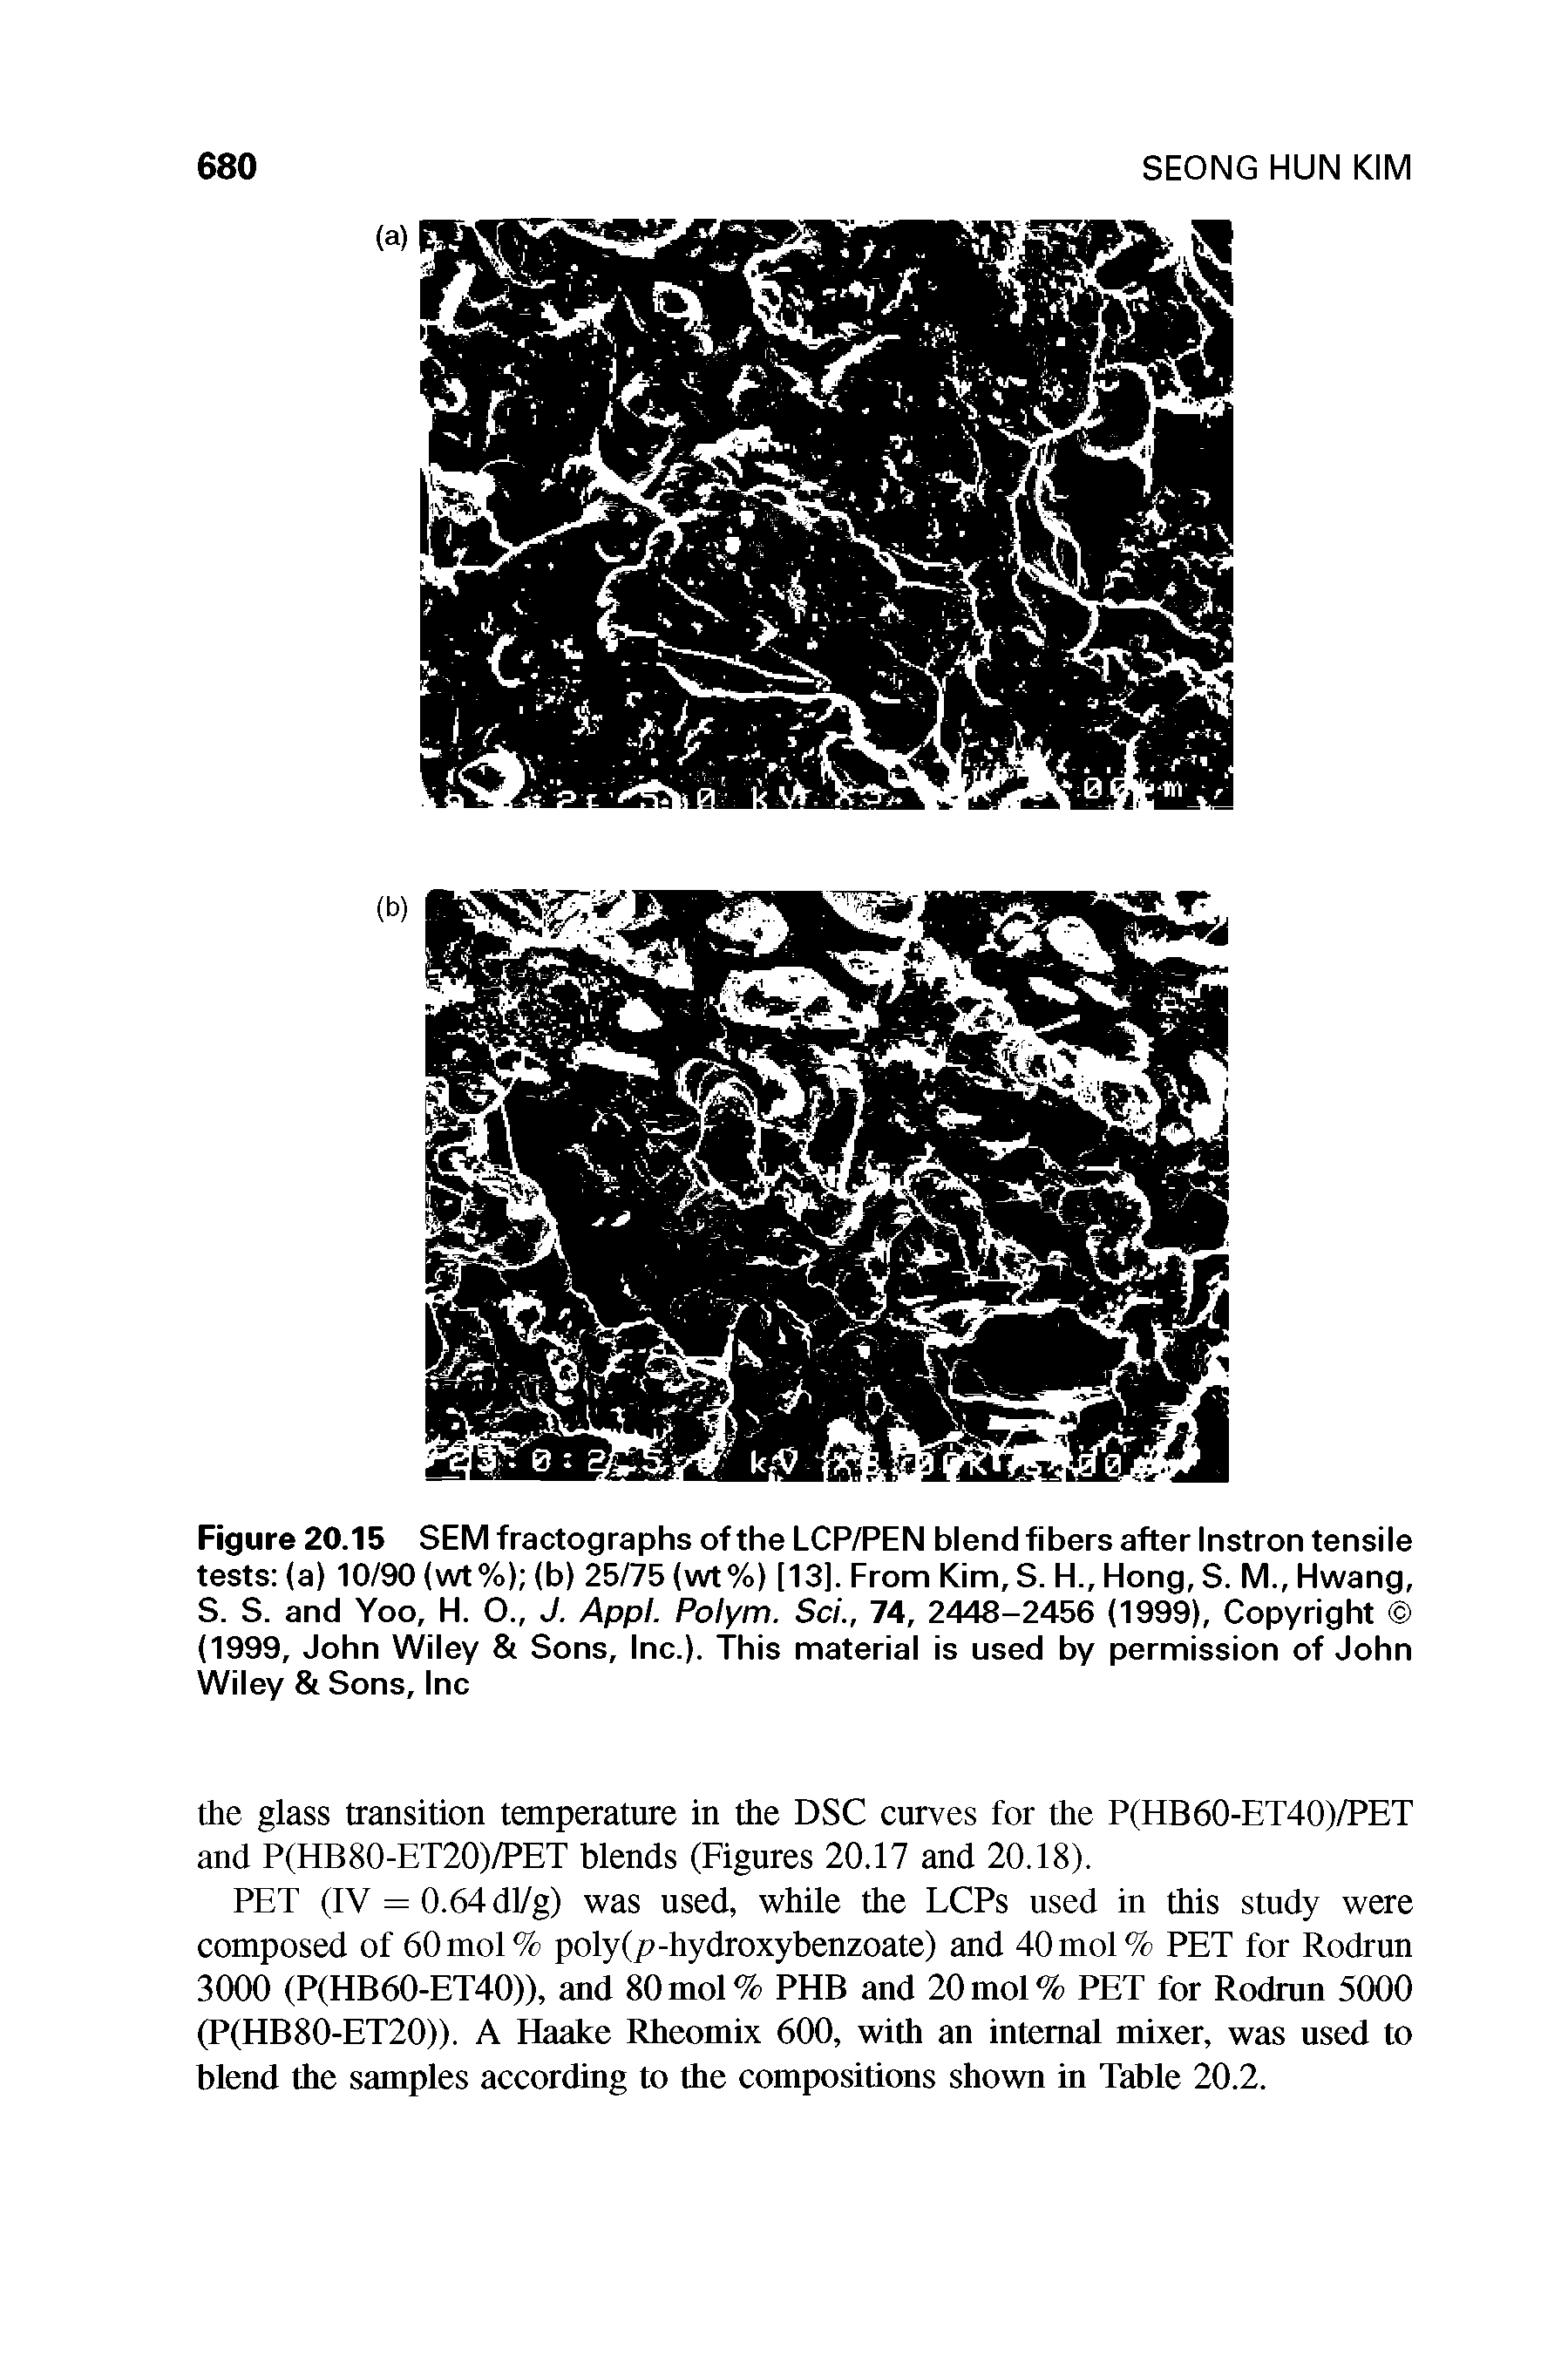 Figure 20.15 SEM fractographs of the LCP/PEN blend fibers after Instron tensile tests (a) 10/90 (wt%) (b) 25/75 (wt%) [13]. From Kim, S. H., Hong, S. M., Hwang, S. S. and Yoo, H. O., J. Appl. Polym. Sci., 74, 2448-2456 (1999), Copyright (1999, John Wiley Sons, Inc.). This material is used by permission of John Wiley Sons, Inc...